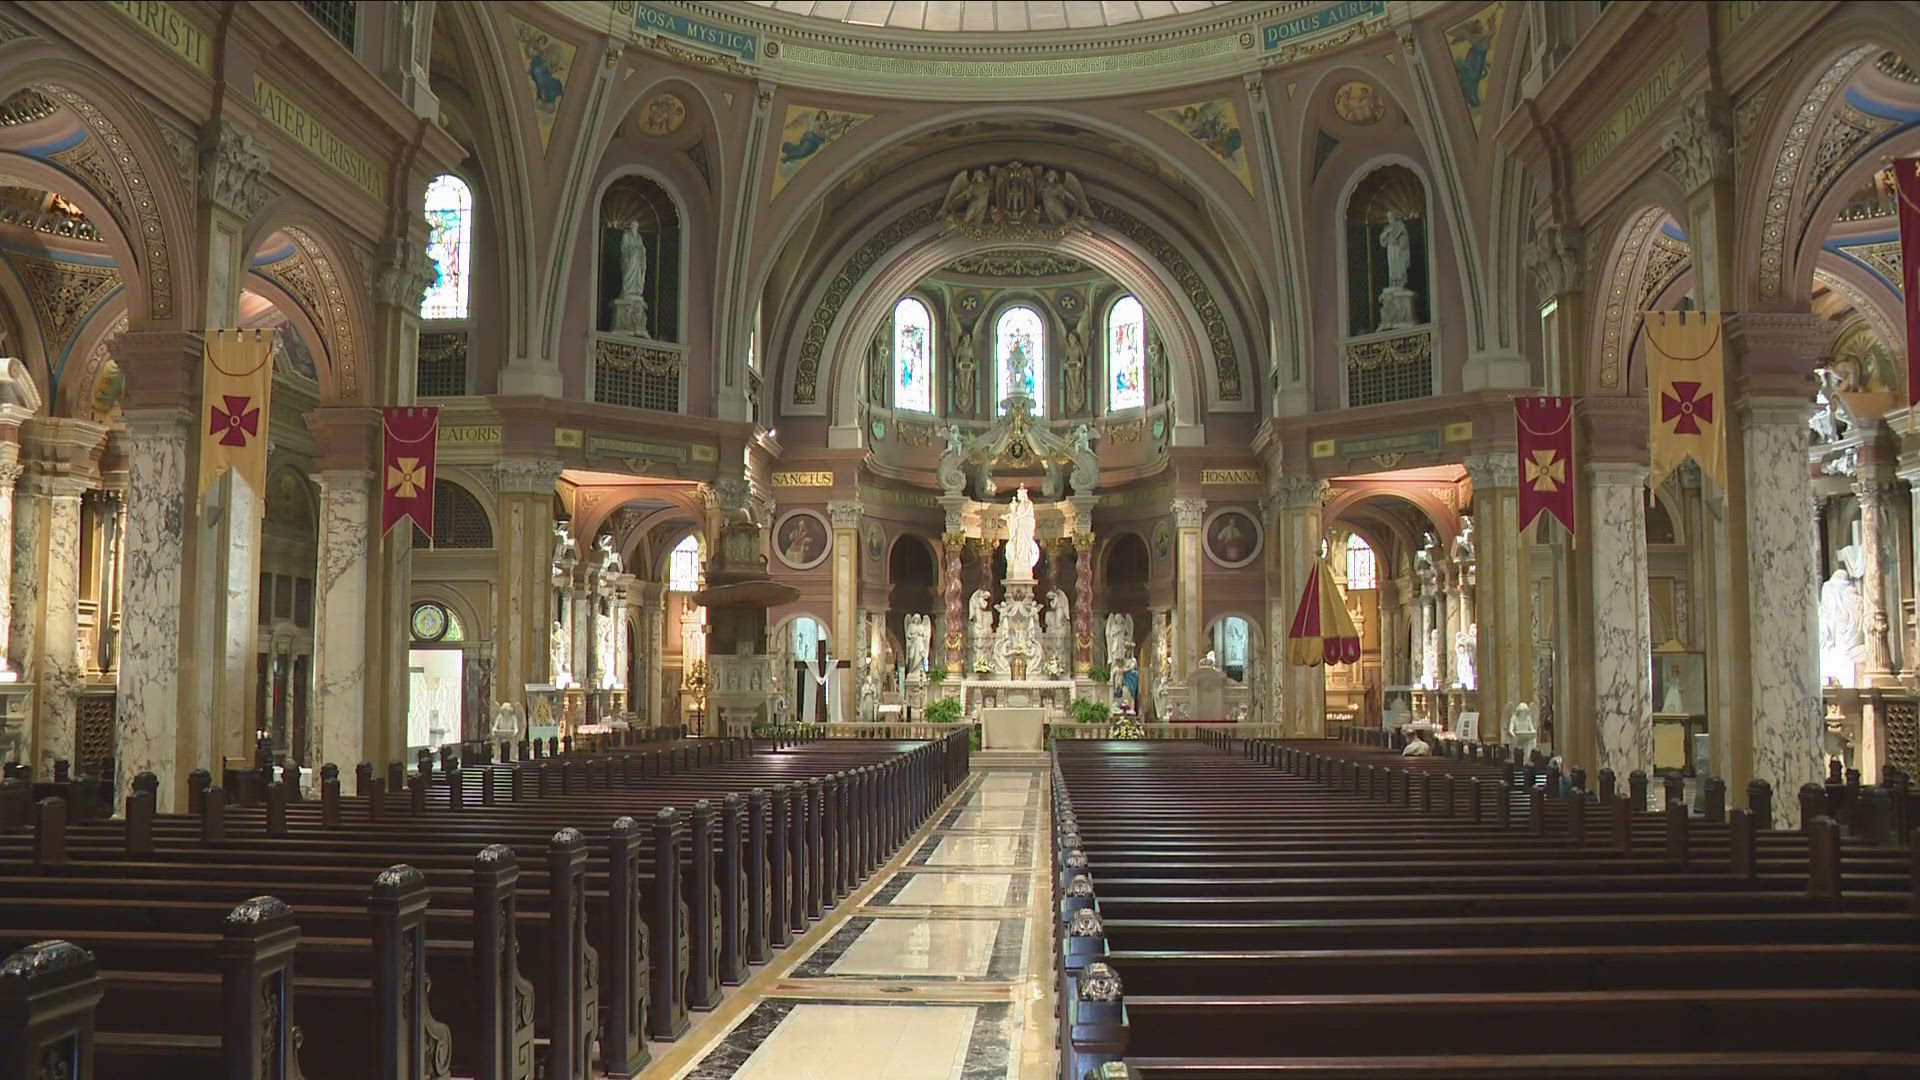 As restoration work continues at Our Lady of Victory Basilica in Lackawanna, the campus has been named an official nationwide and statewide landmark.